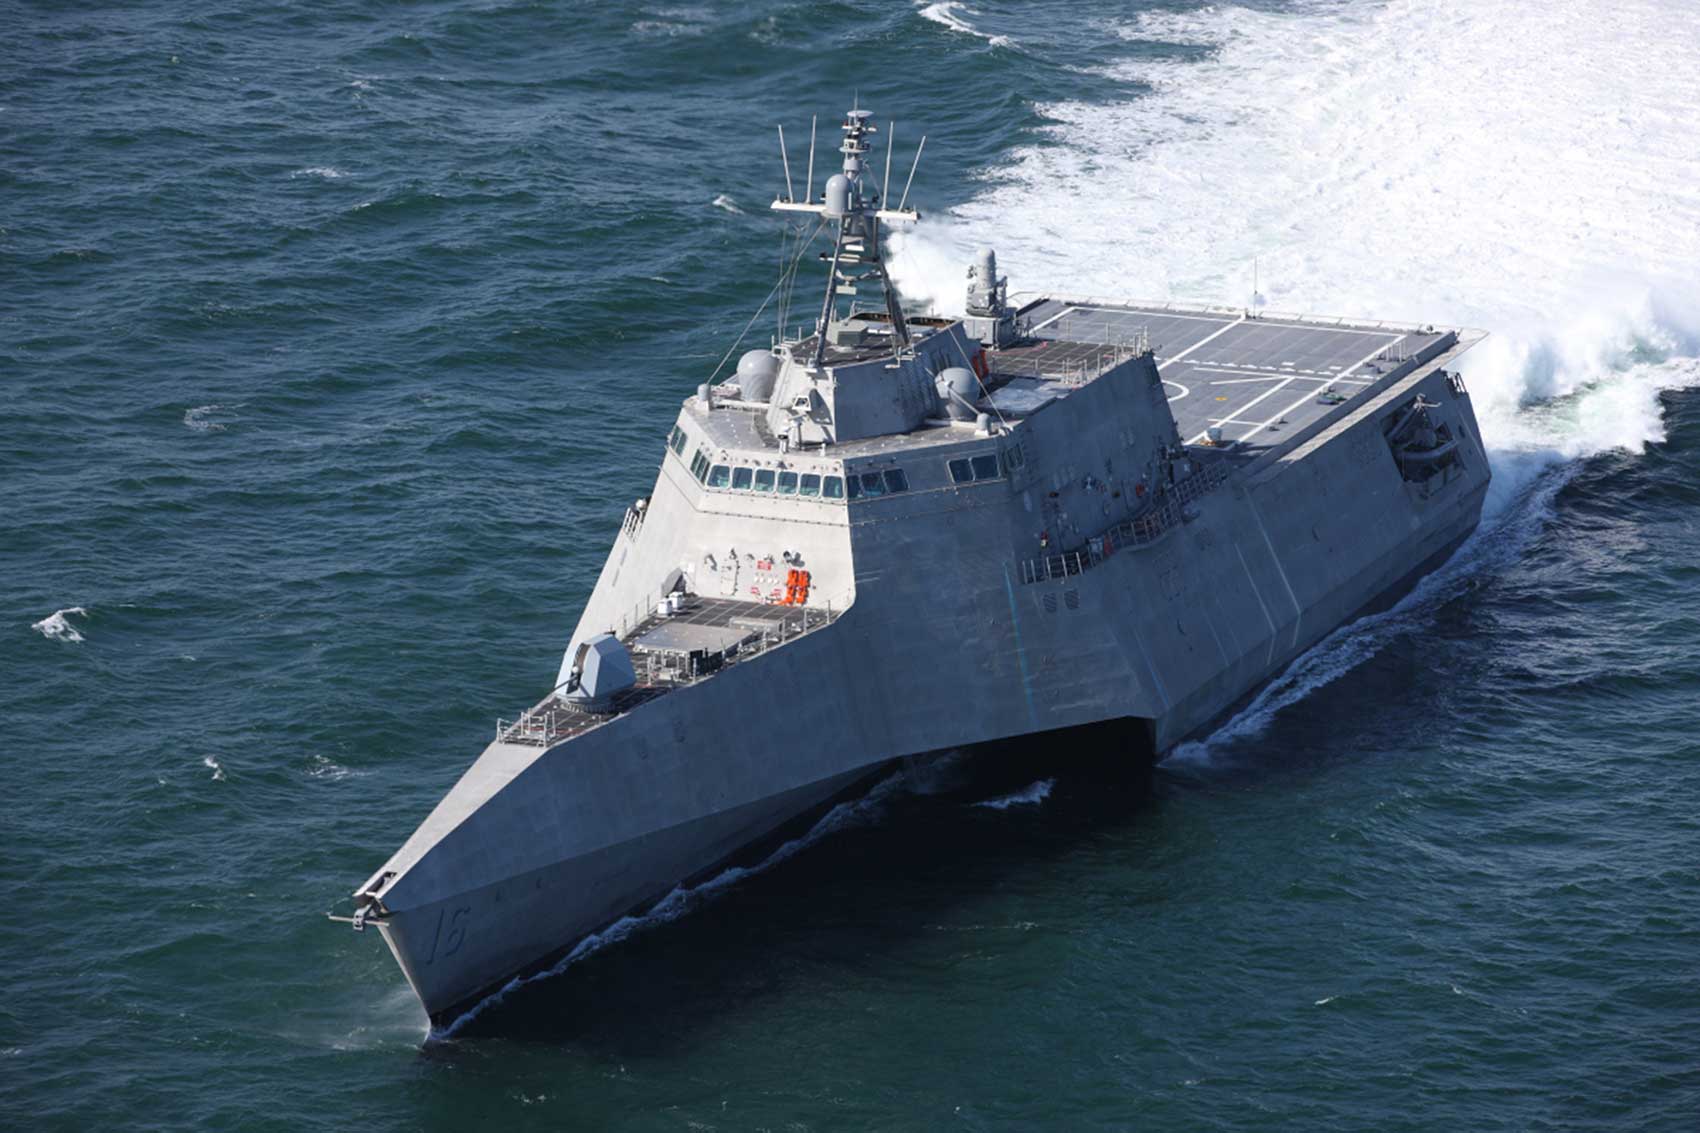 Gulf of Mexico (March 8, 2018) The future USS Tulsa (LCS 16) is underway for acceptance trials, which are the last significant milestone before delivery of the Independence-variant littoral combat ship to the Navy. During trials, the Navy conducted comprehensive tests of the future USS Tulsa, intended to demonstrate the performance of the propulsion plant, ship handling abilities and auxiliary systems -- U.S. Navy photo courtesy of Austal USA. -